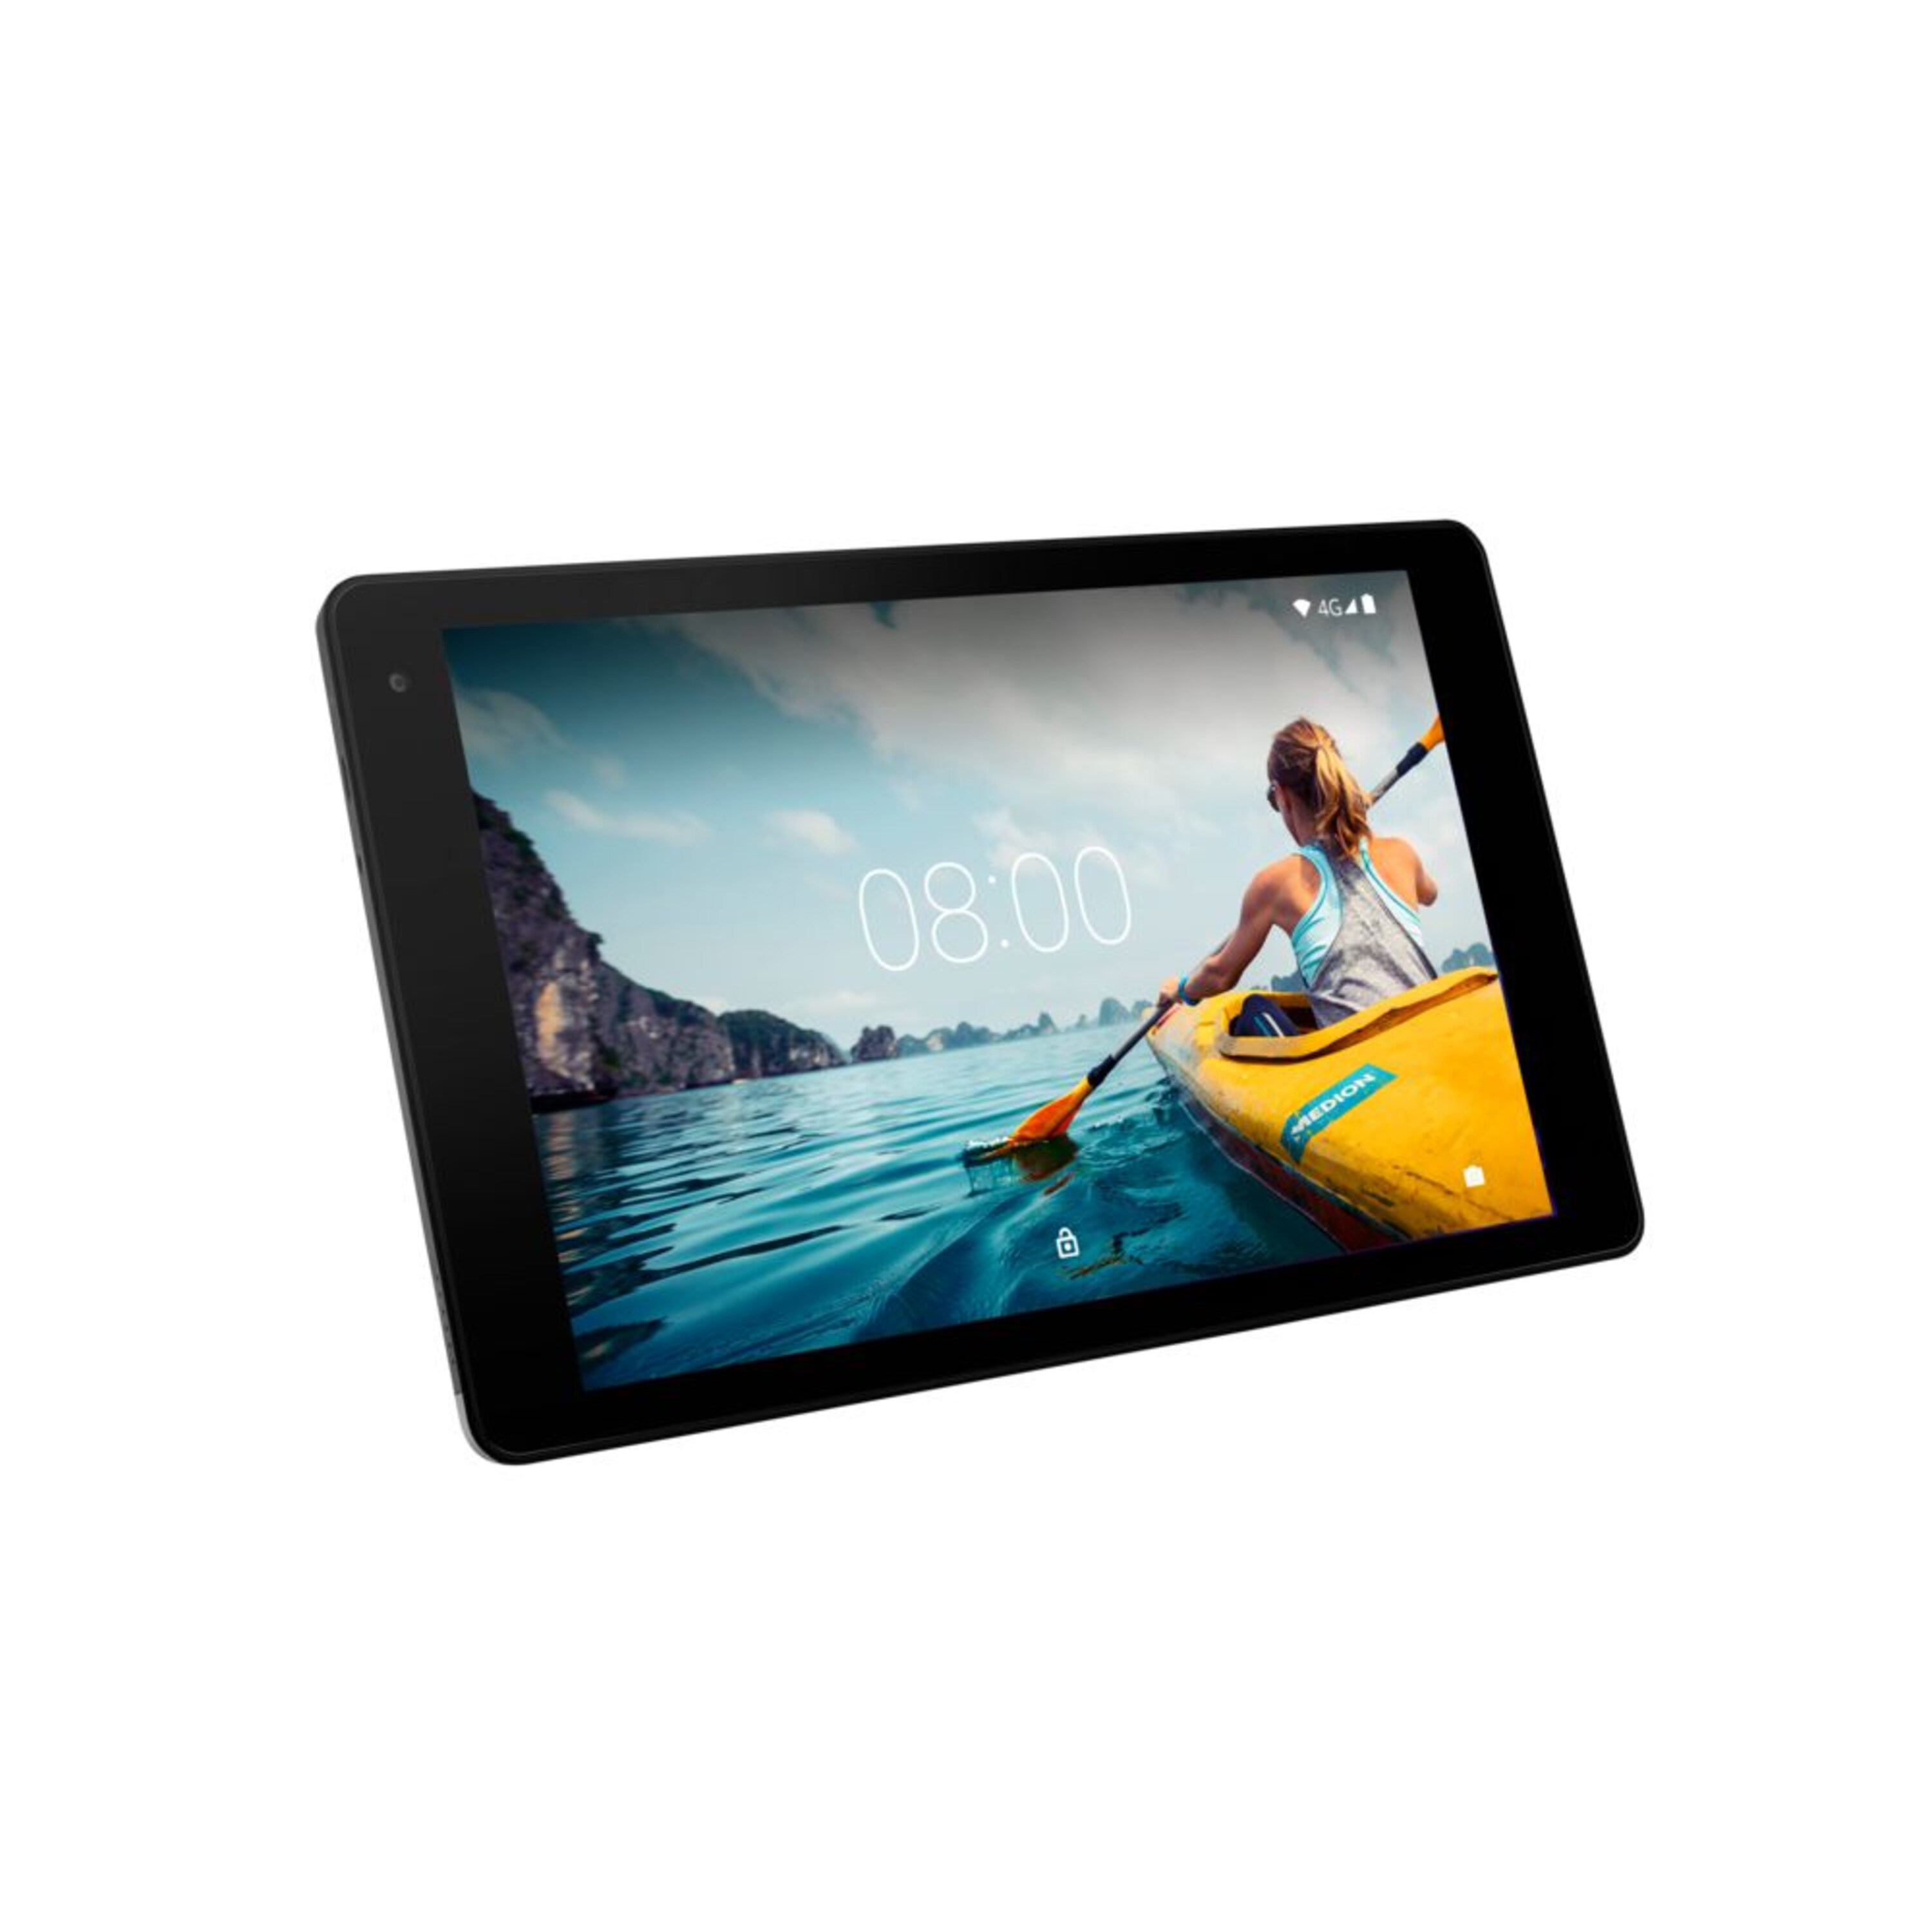 MEDION® LIFETAB® X10605 Tablet, 25,7 cm (10,1“) FHD Display mit Corning® Gorilla® Glass, Update auf Android™ 8, 32 GB Speicher, Octa Core Prozessor, LTE, Quick Charge  (B-Ware)